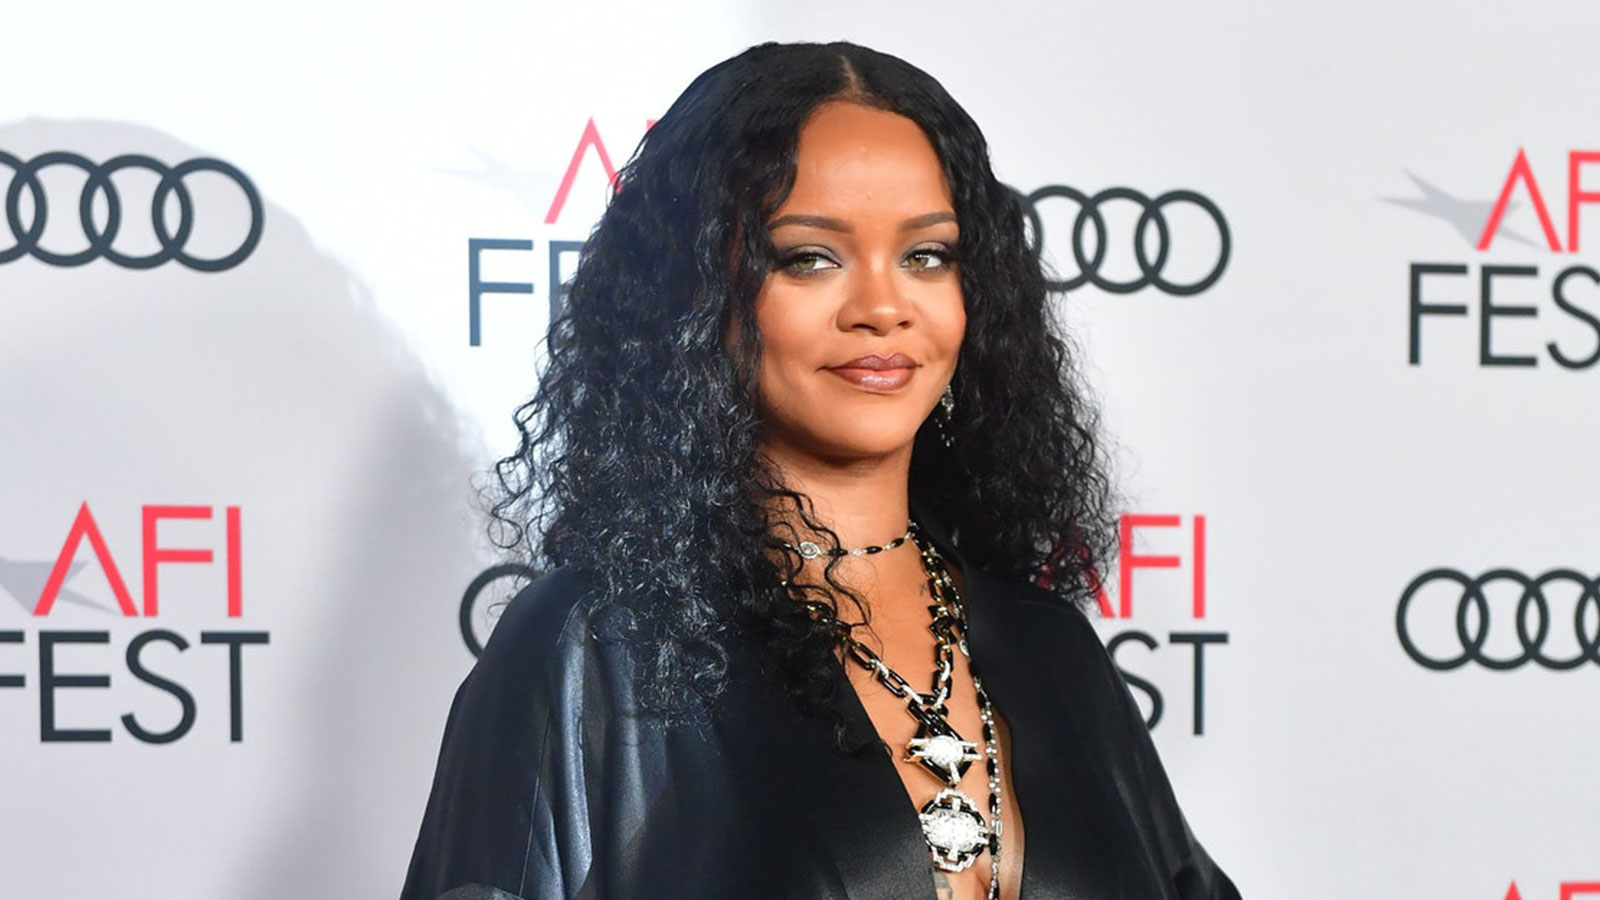 Sorry, Rihanna. I can’t celebrate billionaires – even if they are Black